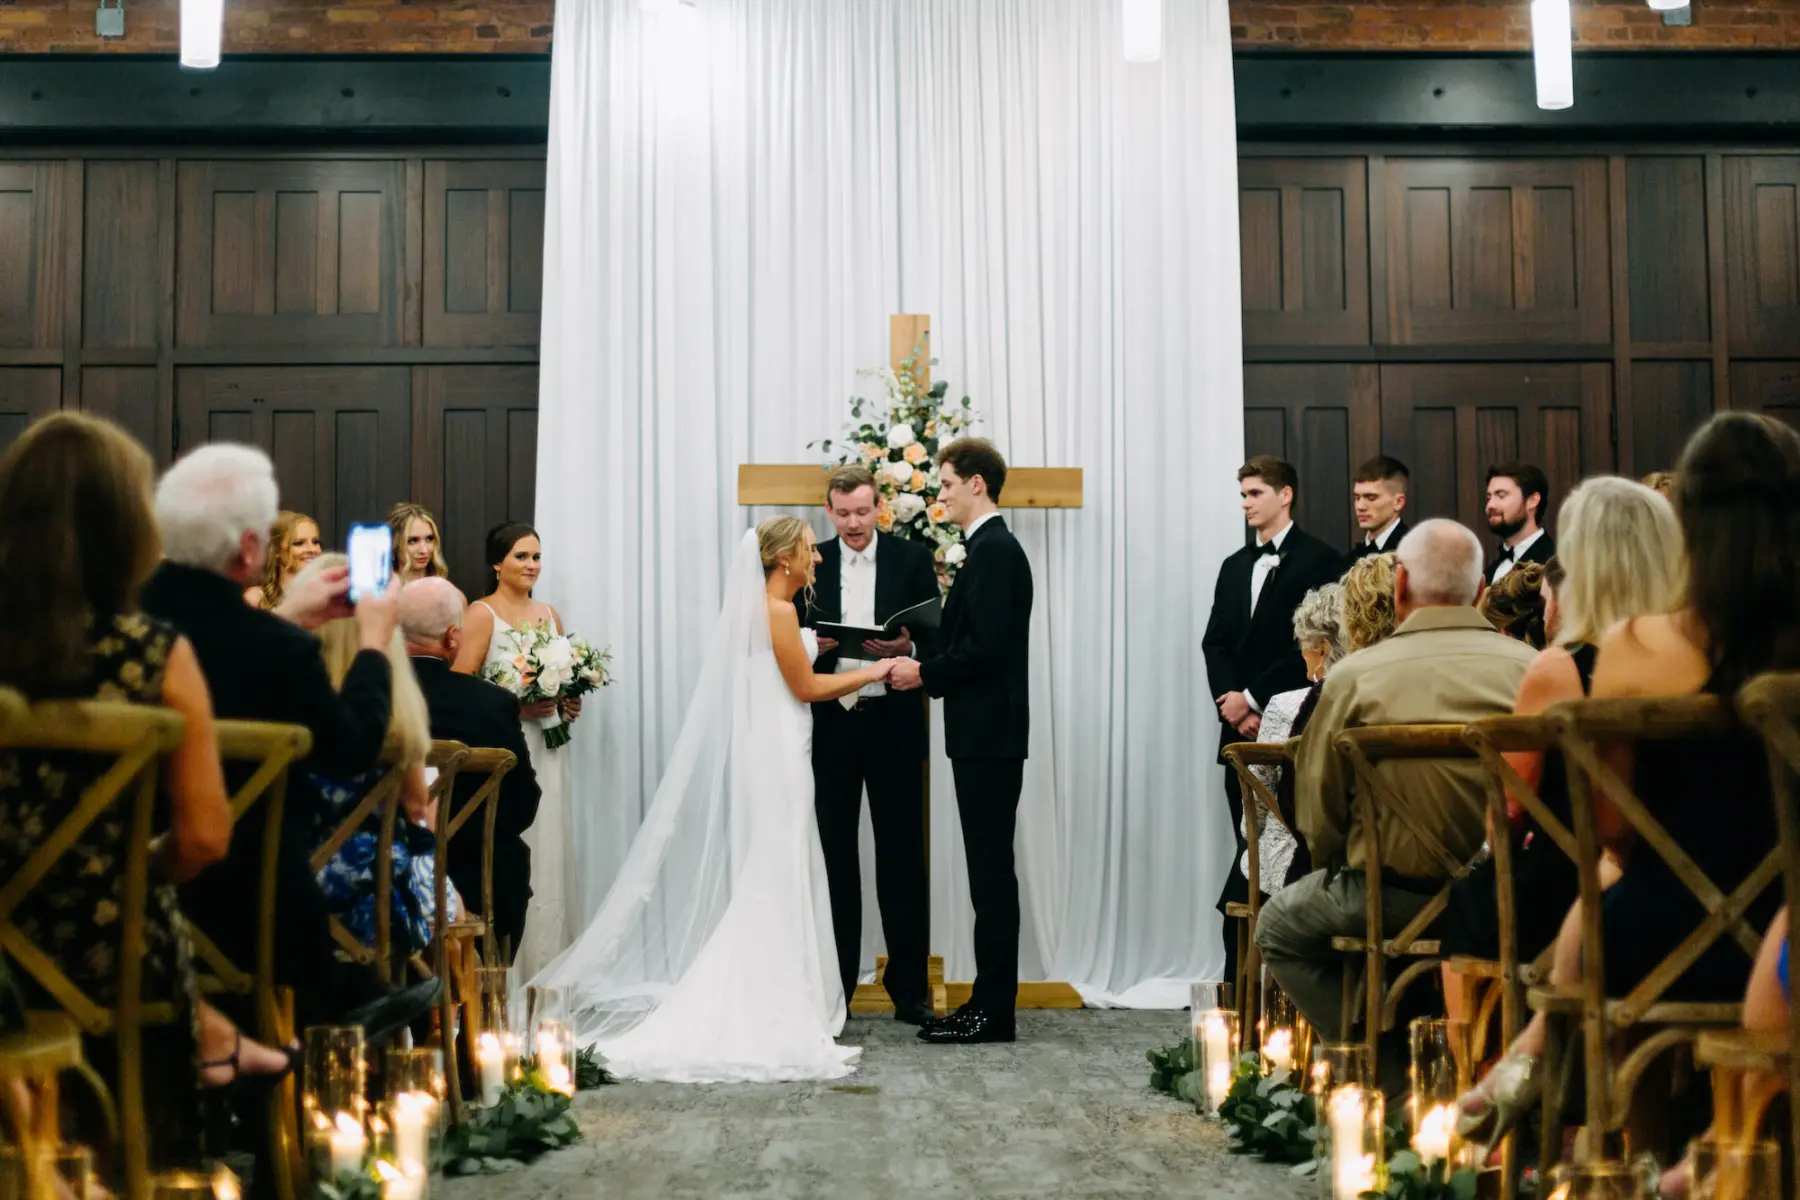 Classic White and Greenery Wedding Ceremony Floral Inspiration with Cross at Altar | Tampa Florist Save the Date Florida | Venue Armature Works | Amber McWhorter Photography